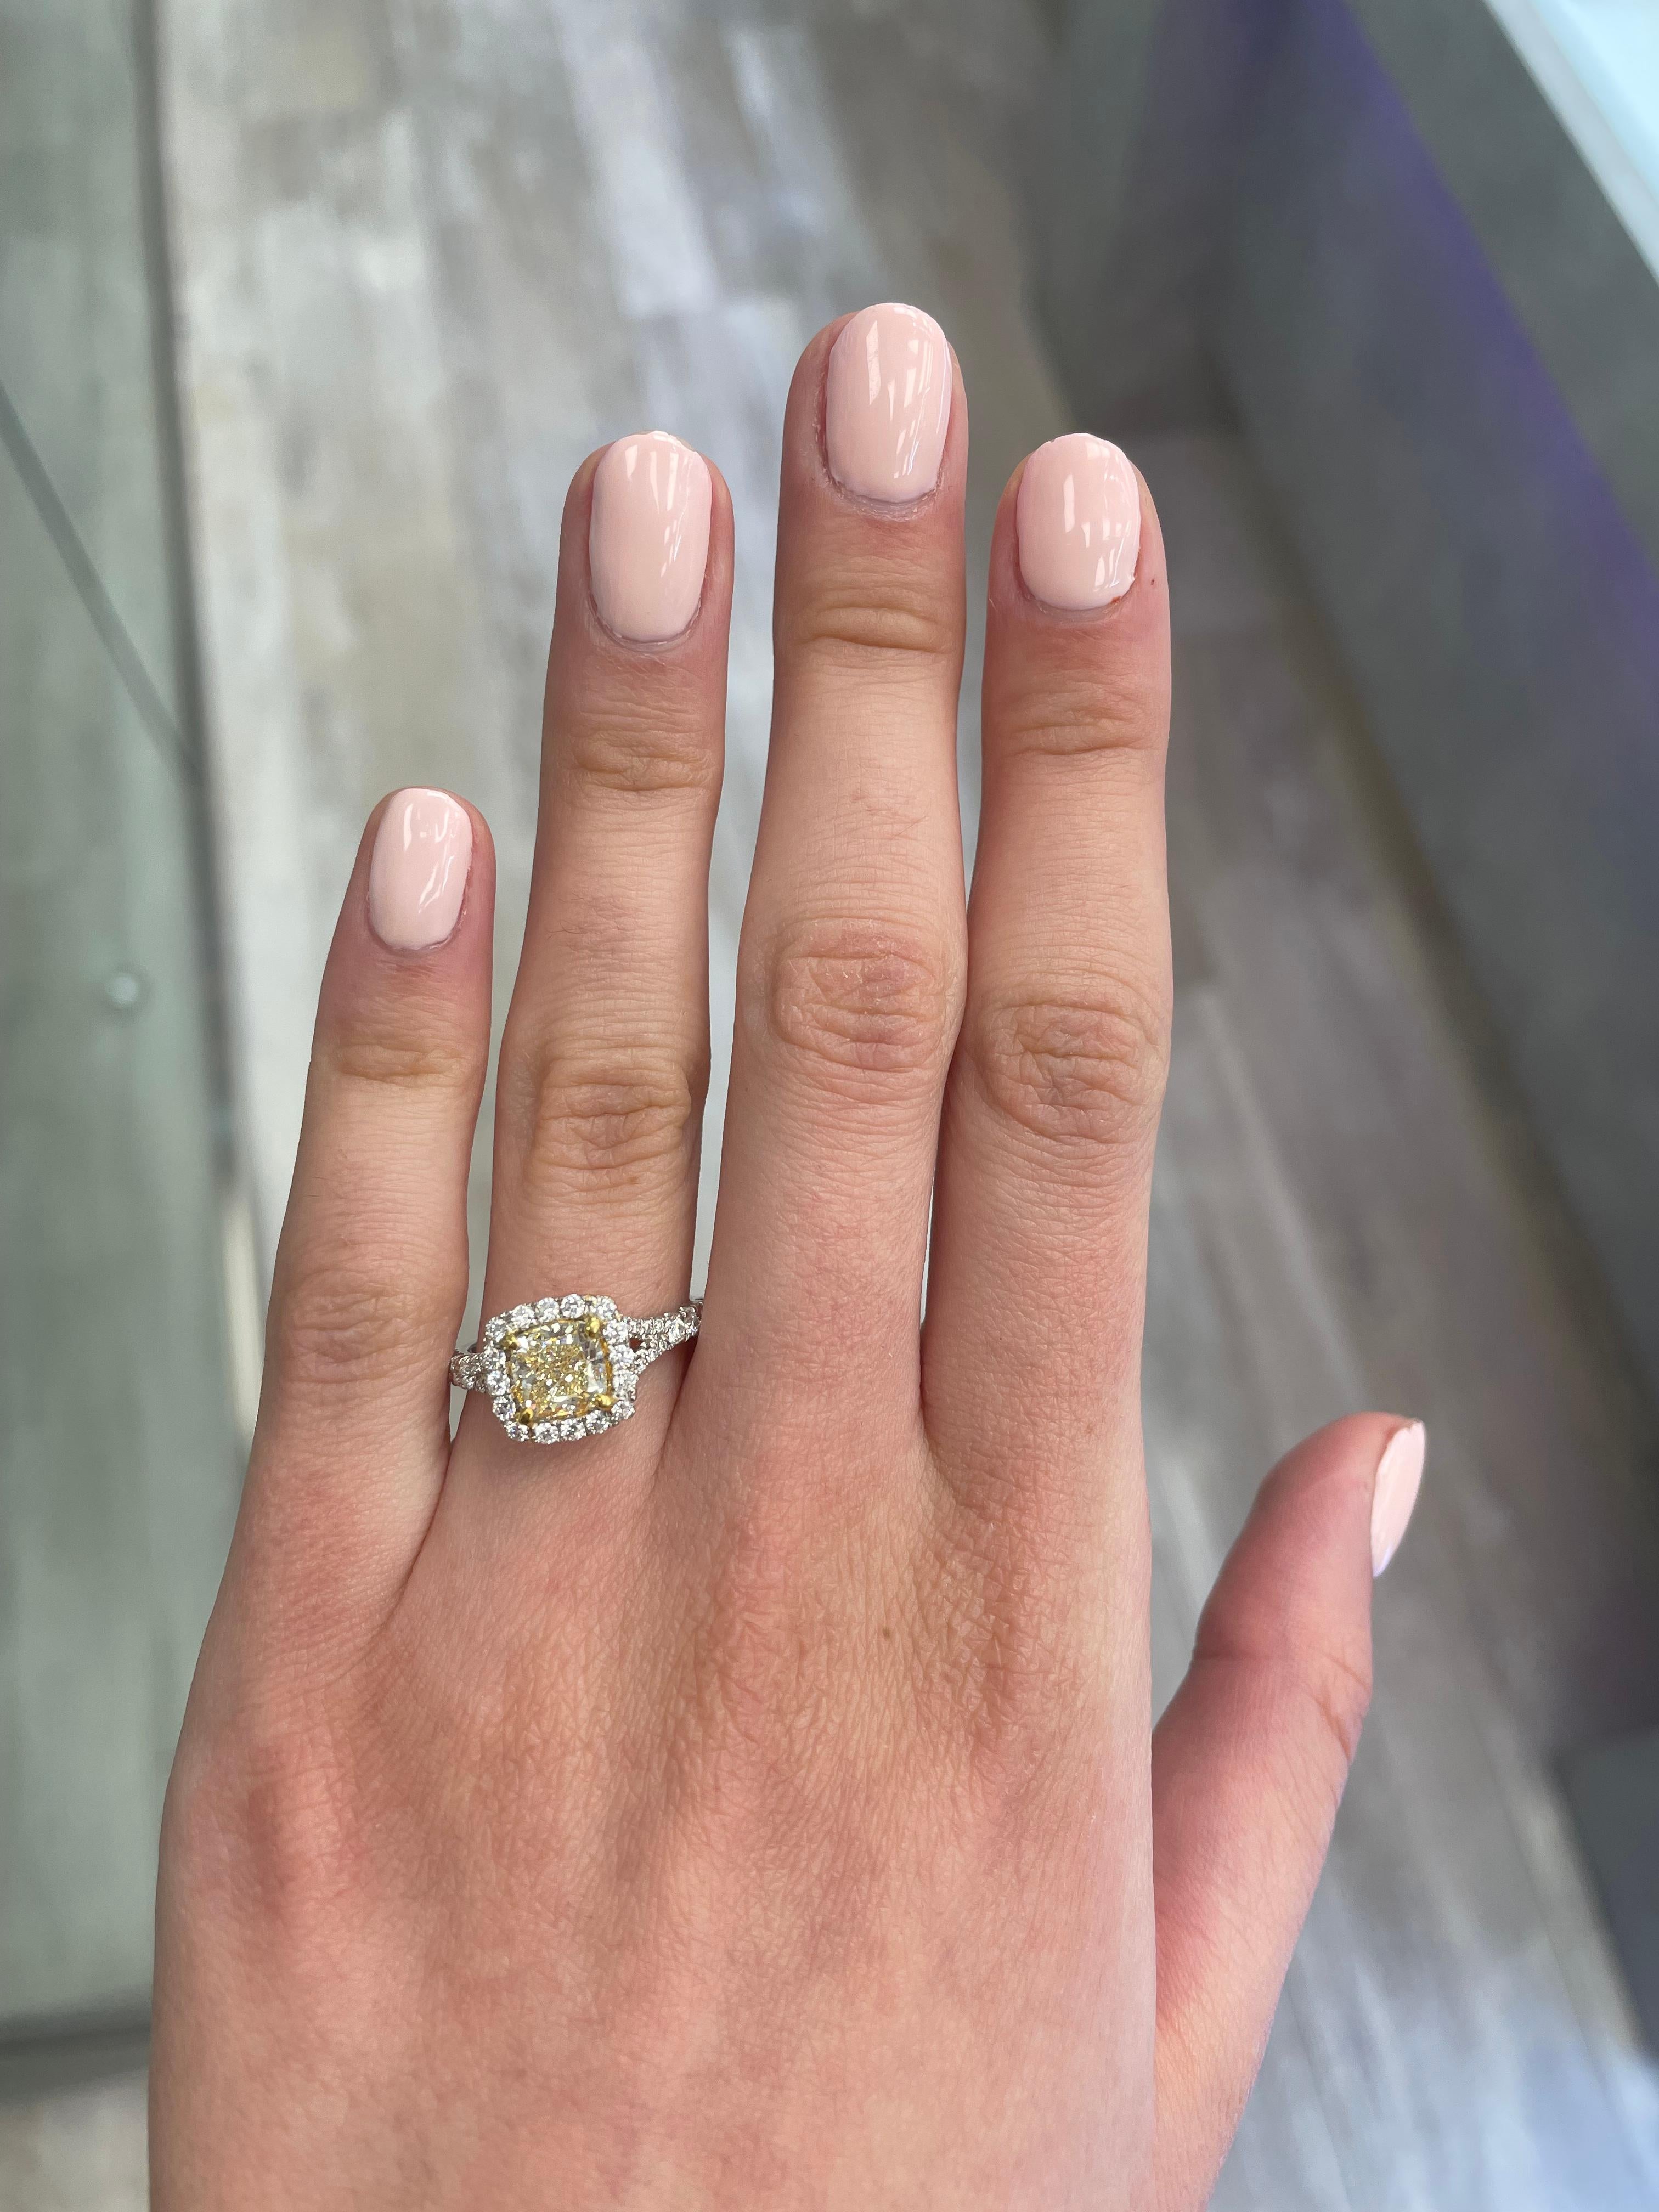 Stunning modern EGL certified yellow diamond with halo ring, two-tone 18k yellow and white gold, split shank. By Alexander Beverly Hills
2.16 carats total diamond weight.
1.57 carat cushion cut Fancy Light Yellow color and VS2 clarity diamond, EGL